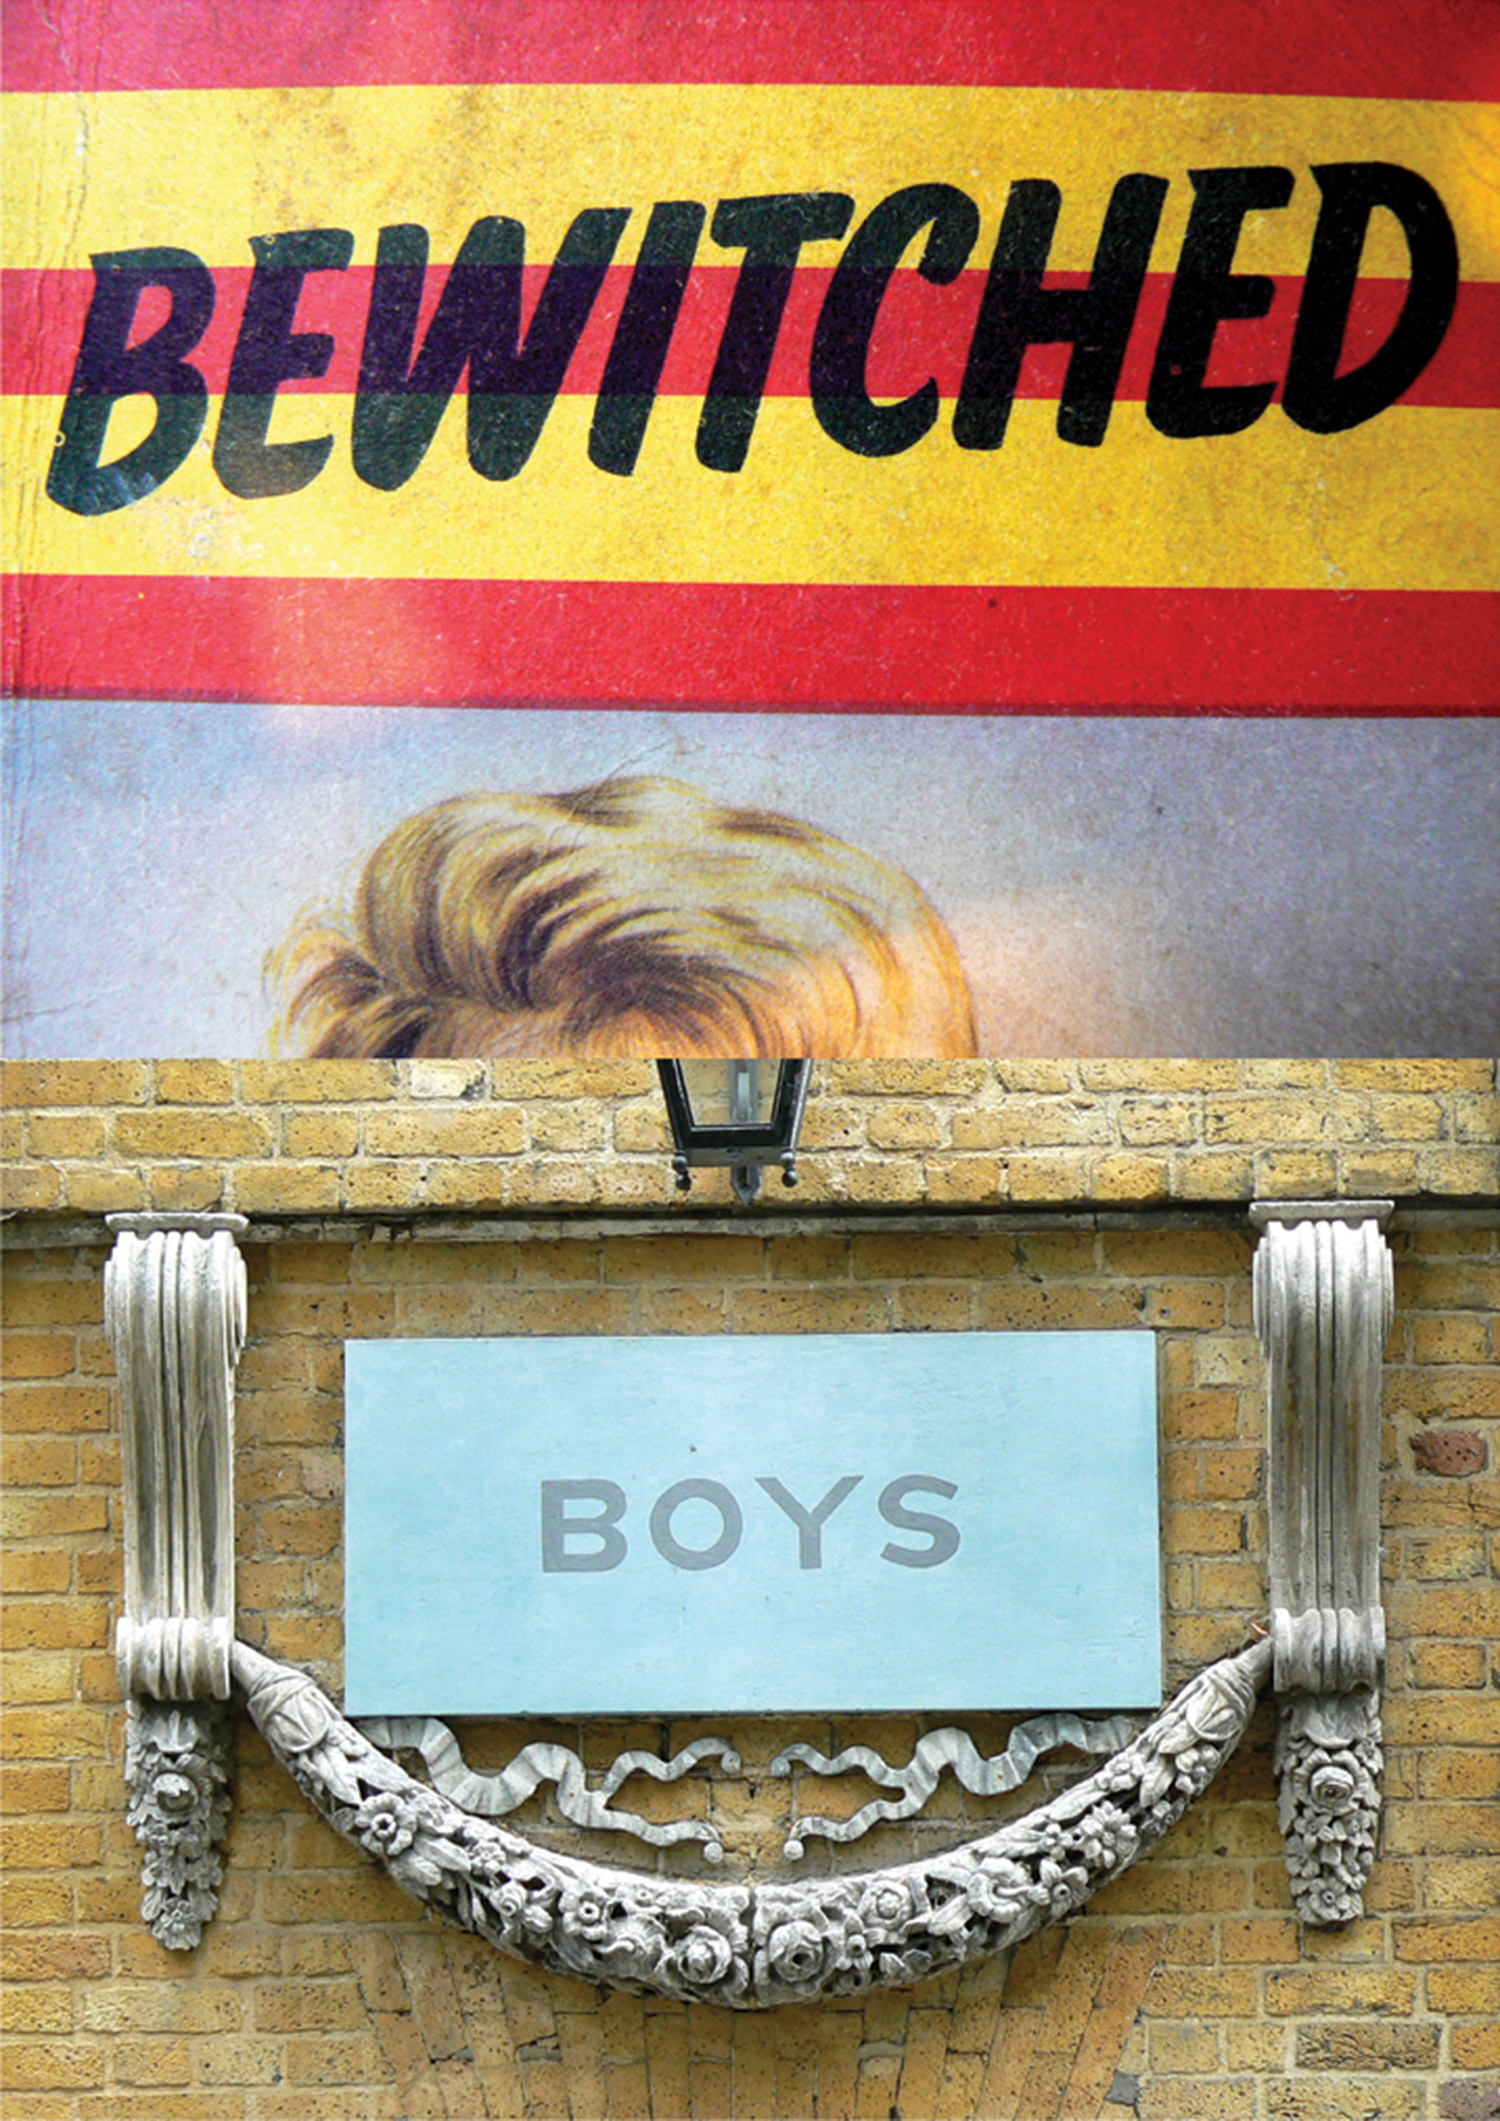 Bewitched Boys by Phil Gray